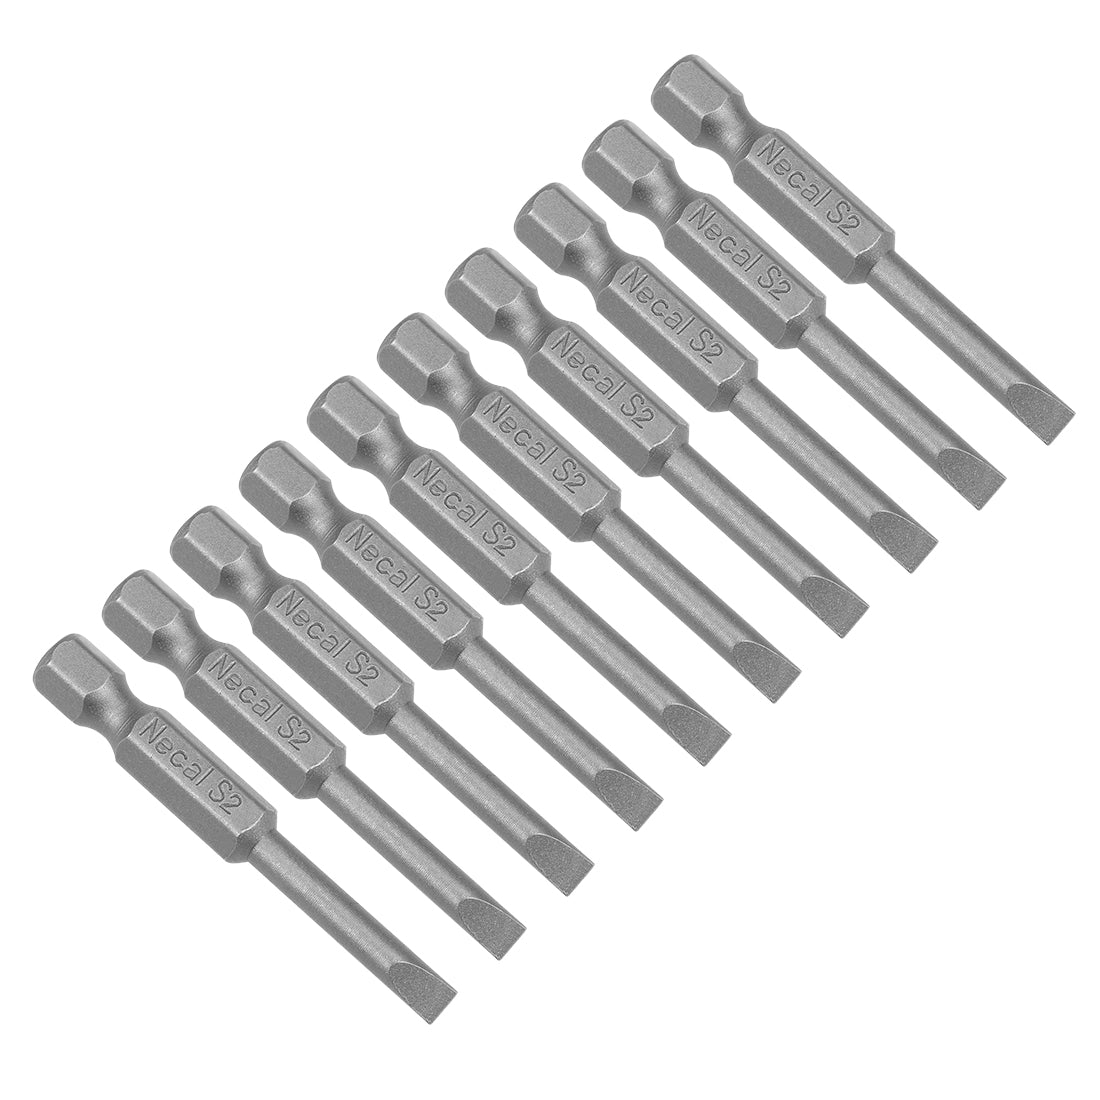 uxcell Uxcell 10Pcs 1/4" Hex Shank 50mm Length Magnetic SL4 Slot Head Screwdriver Bits S2 Alloy Steel